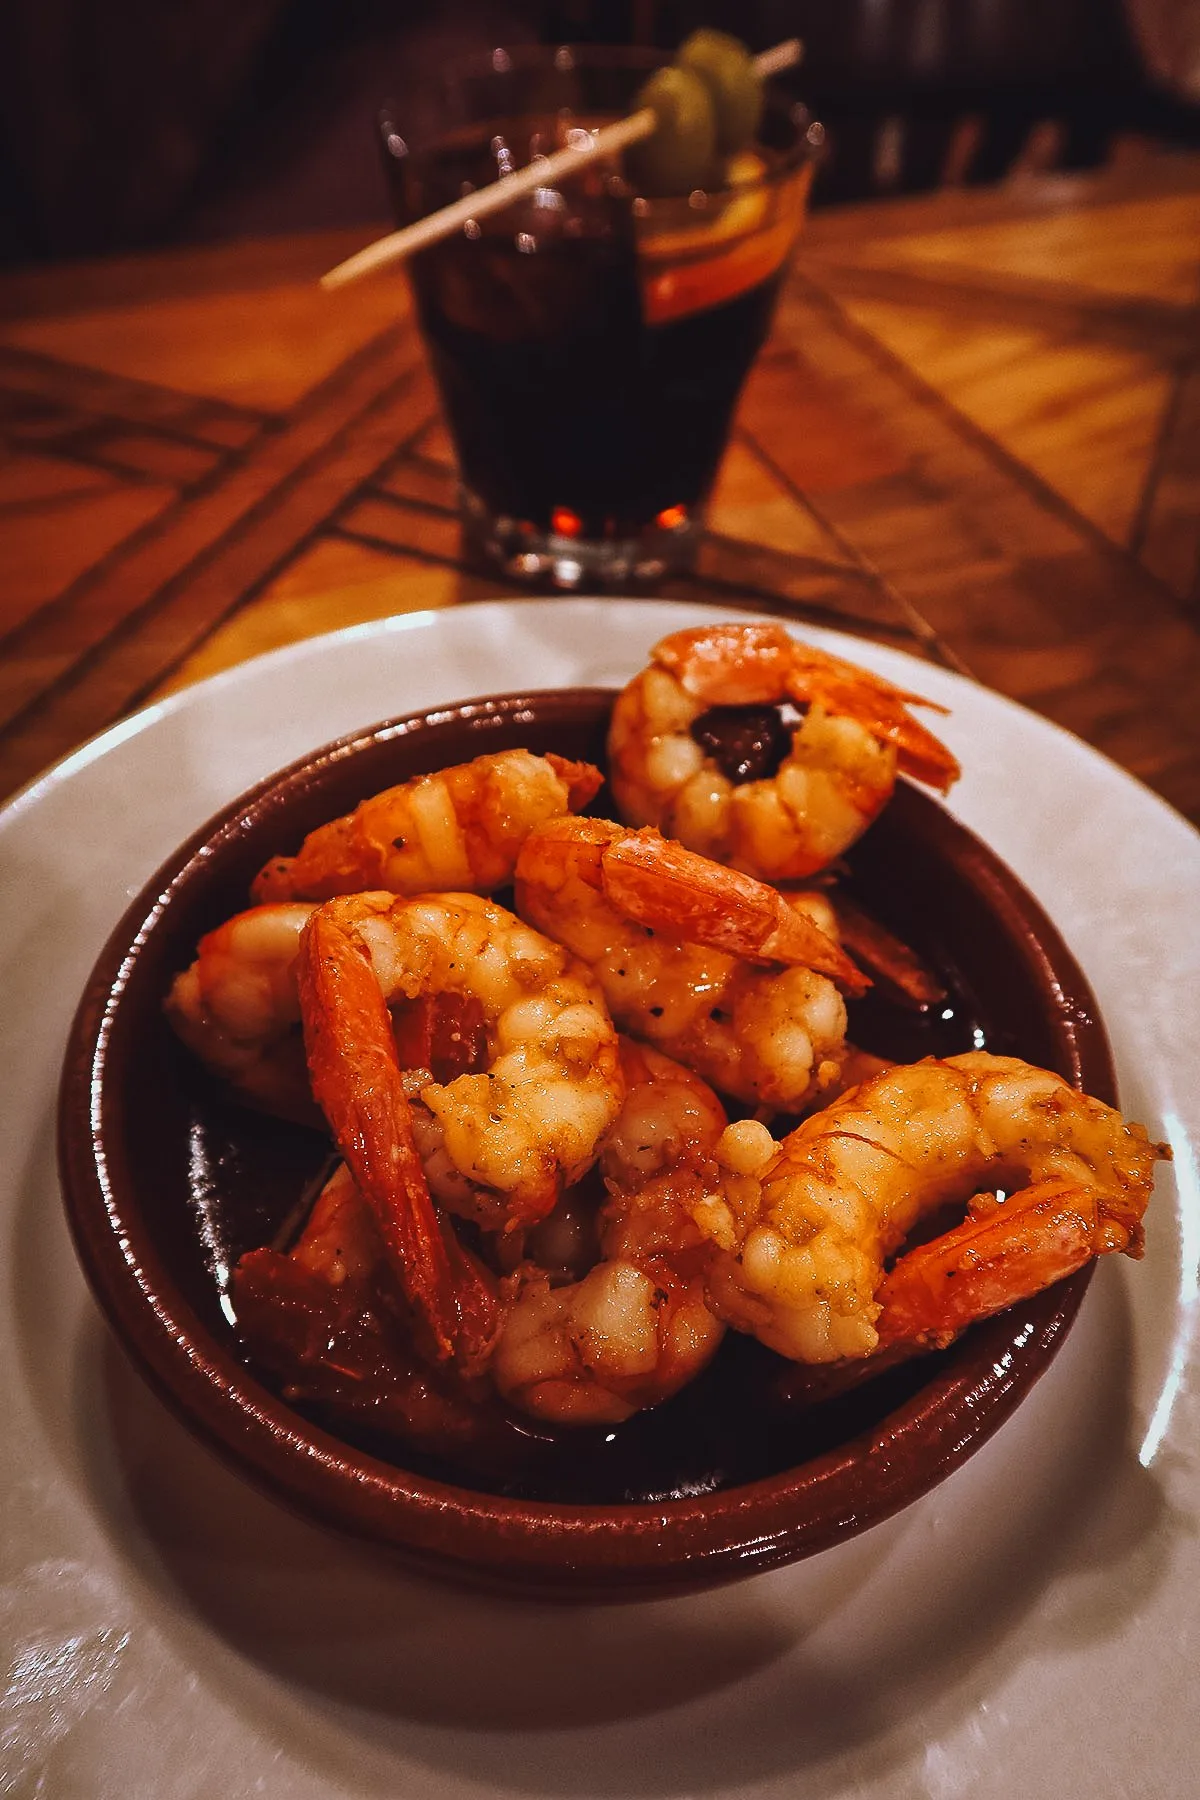 Gambas at a restaurant in Barcelona